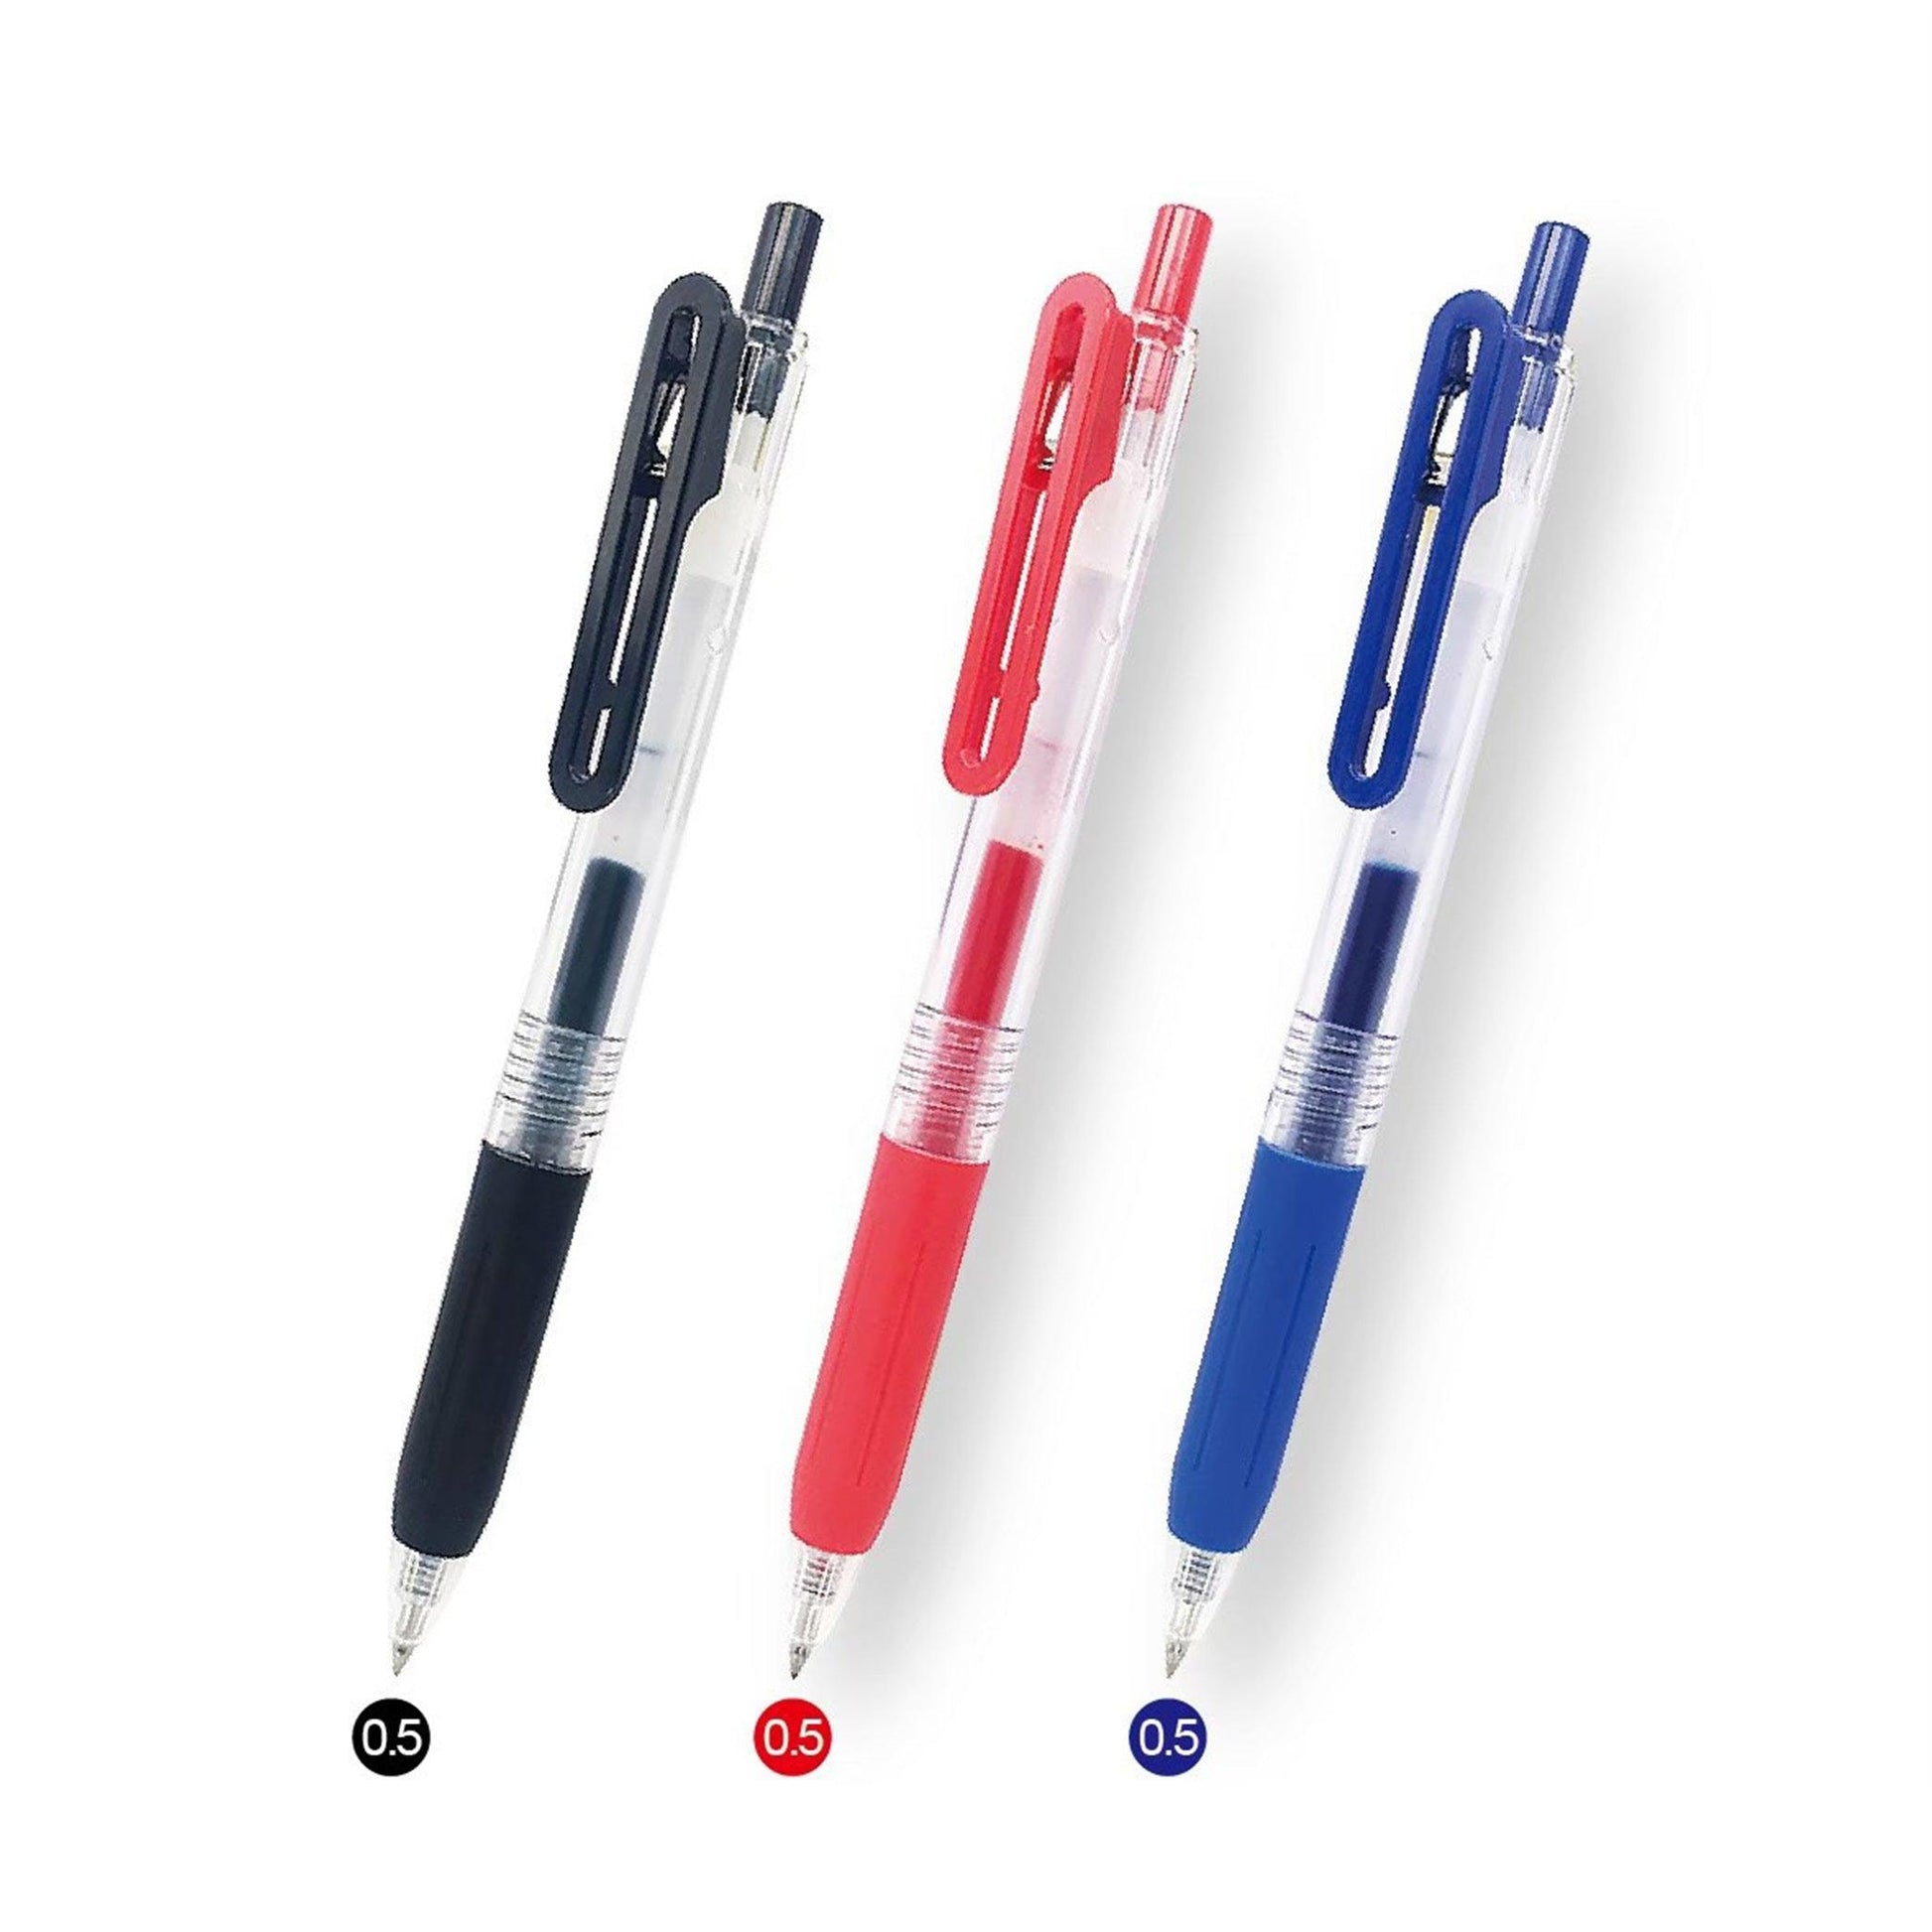 Gel pen TOWO quick-drying large capacity replaceable refill office student school teacher stationery 0.5mm J-15 - CHL-STORE 